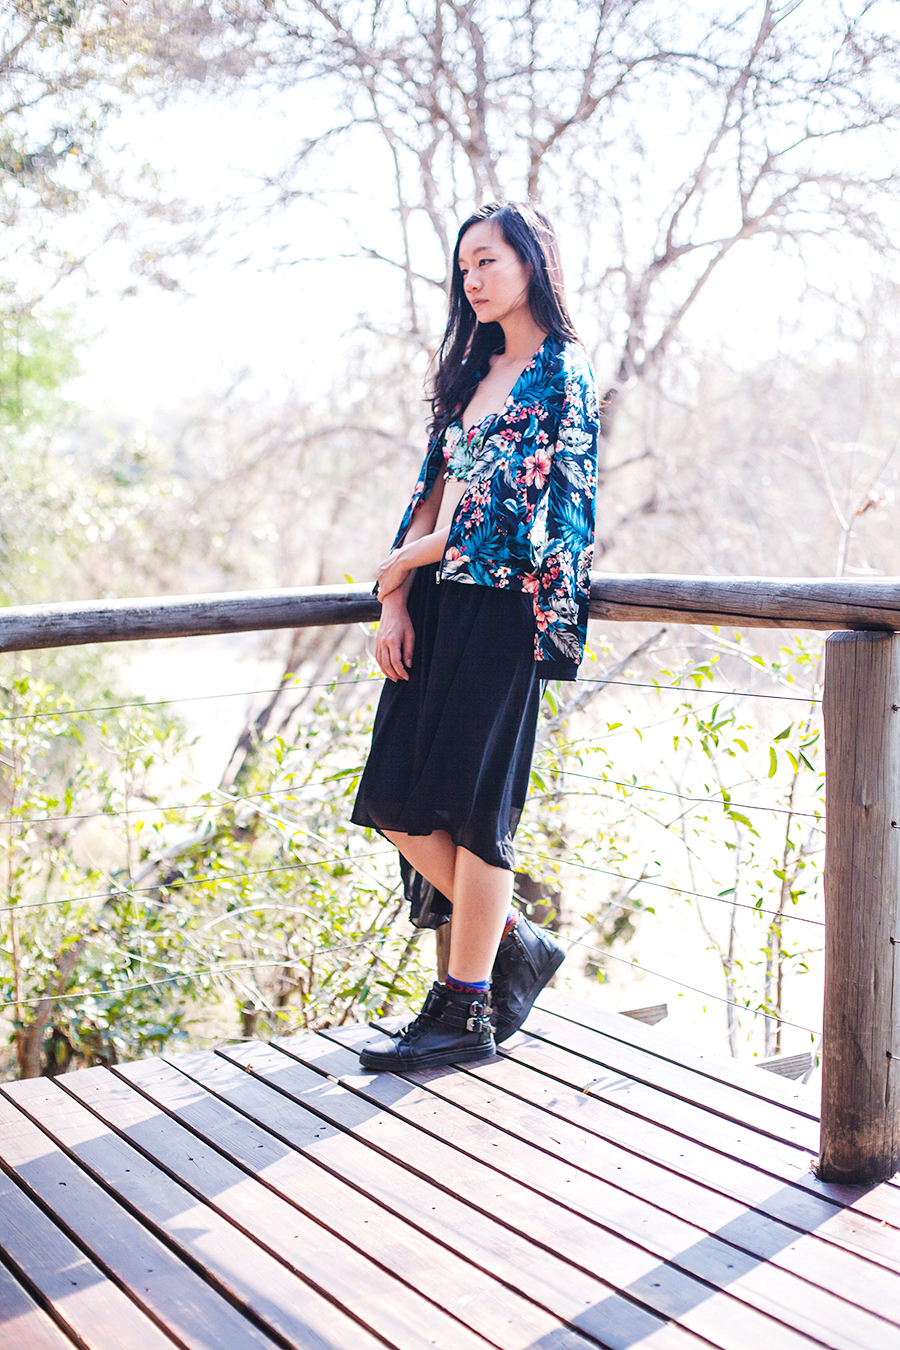 Floral and black outfit for safari, South Africa.